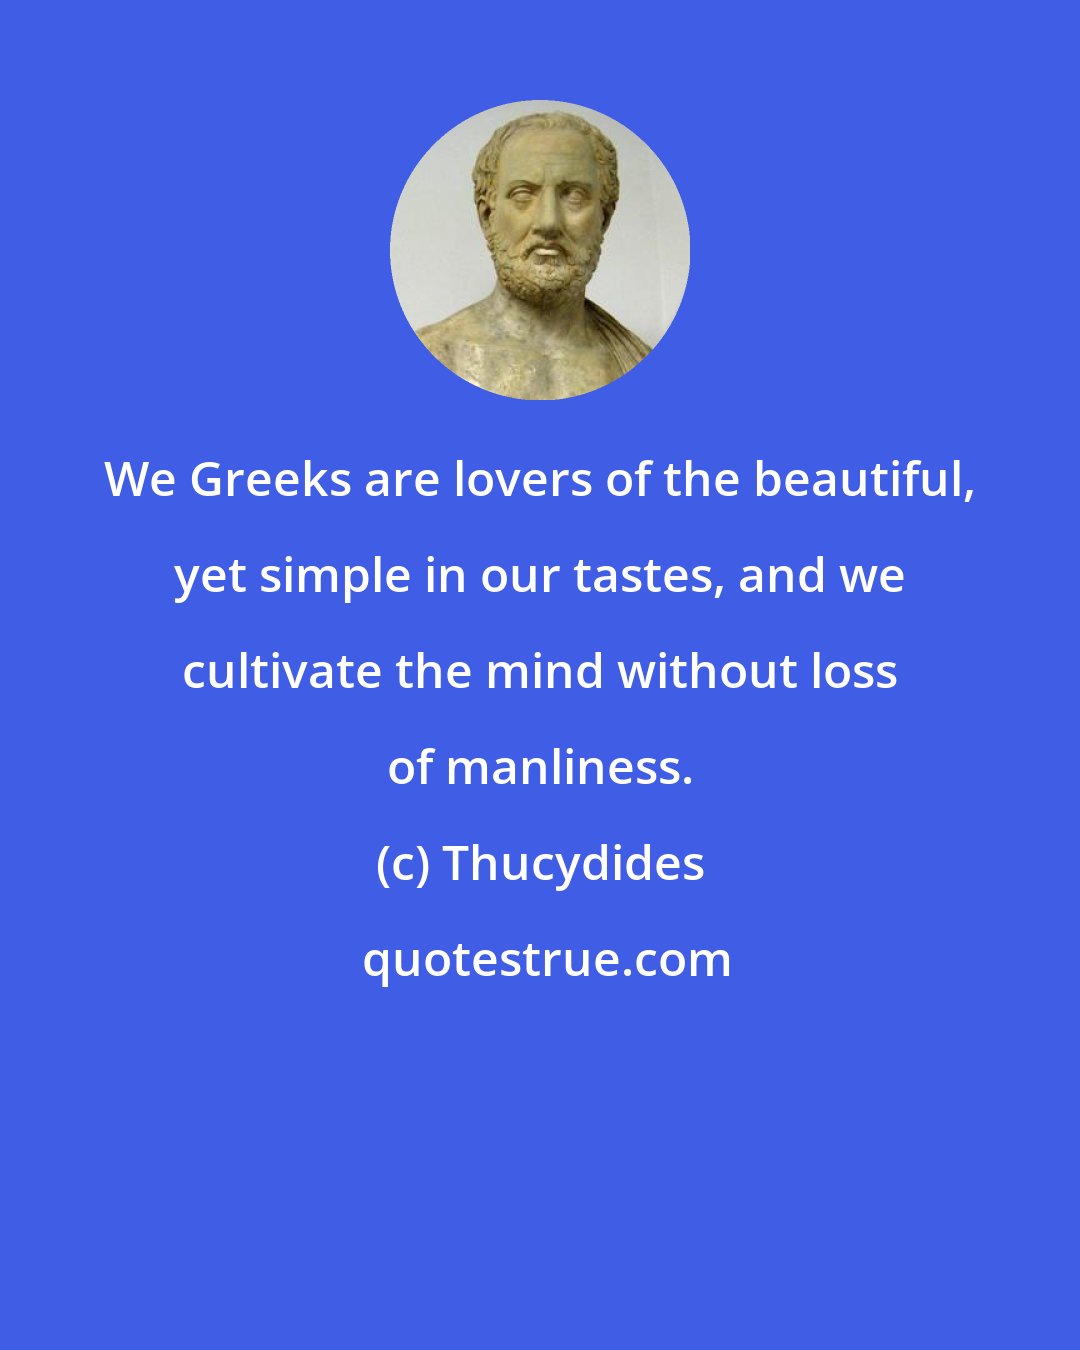 Thucydides: We Greeks are lovers of the beautiful, yet simple in our tastes, and we cultivate the mind without loss of manliness.